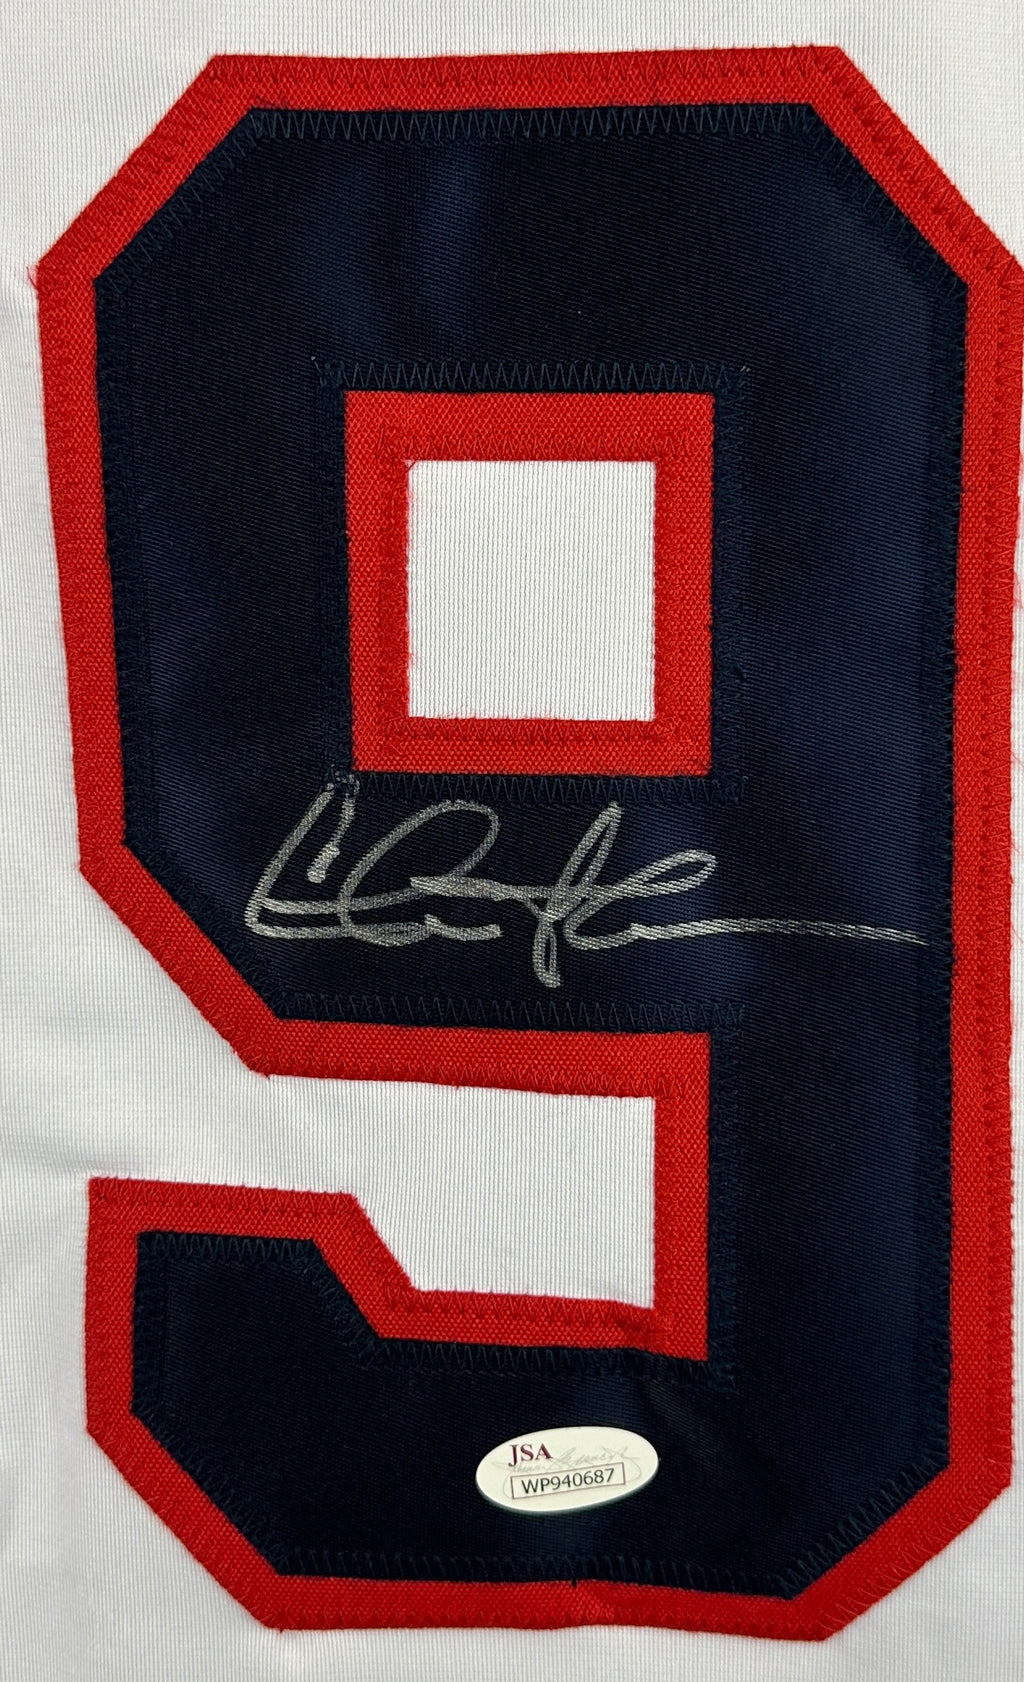 Charlie Sheen autographed signed jersey JSA Major League Ricky Wild Thing Vaughn